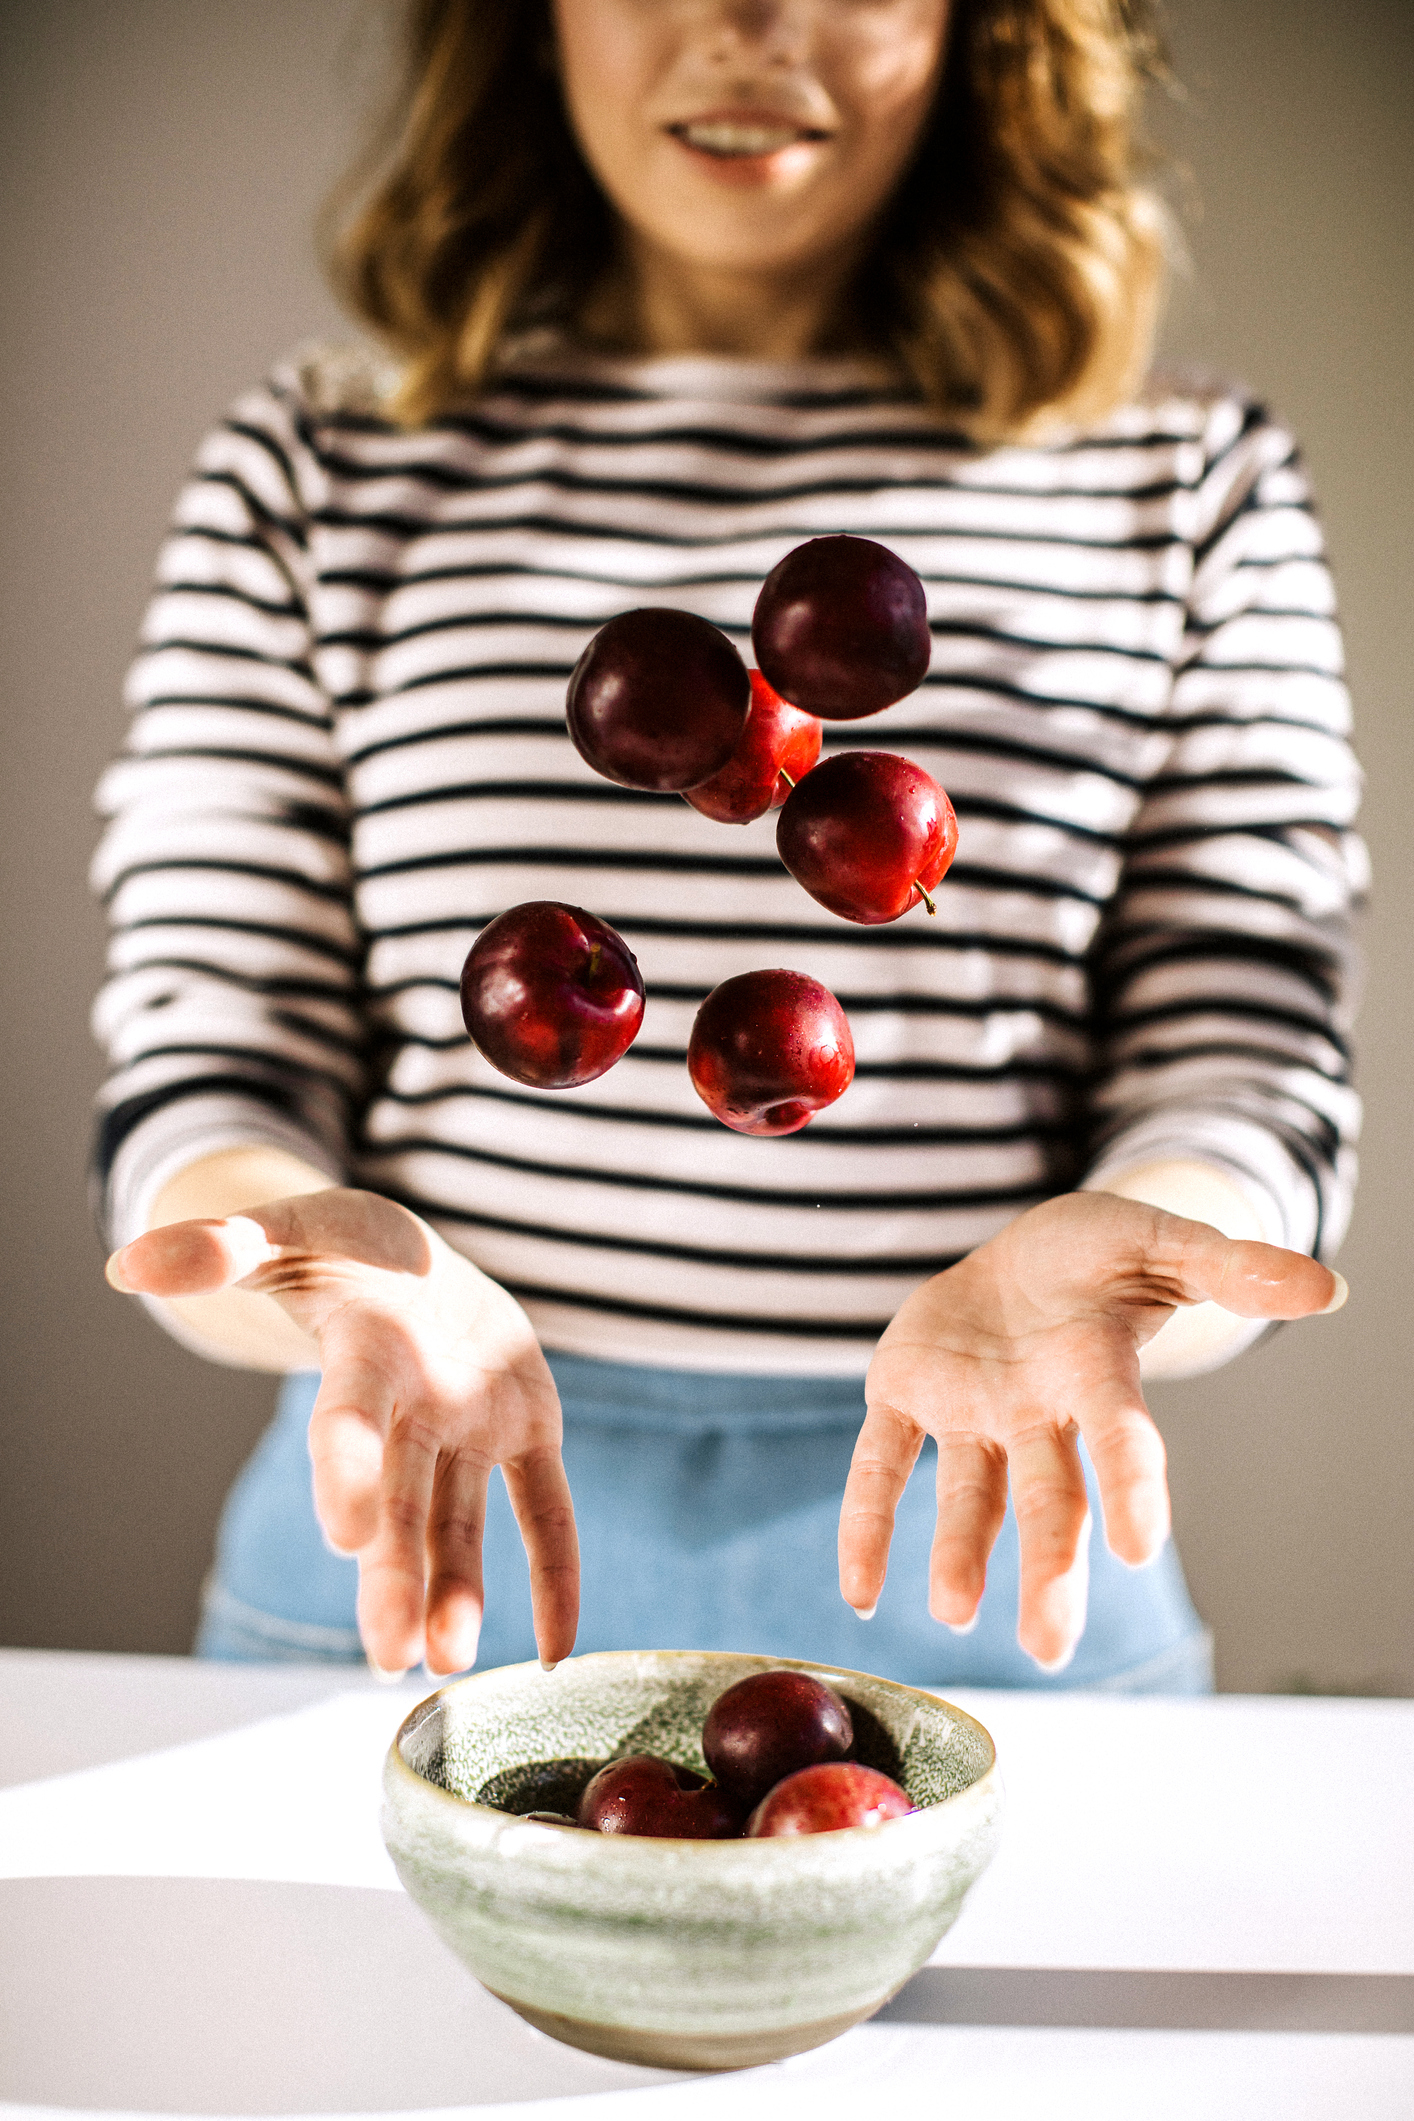 Smiling woman throwing red plums from bowl in the kitchen